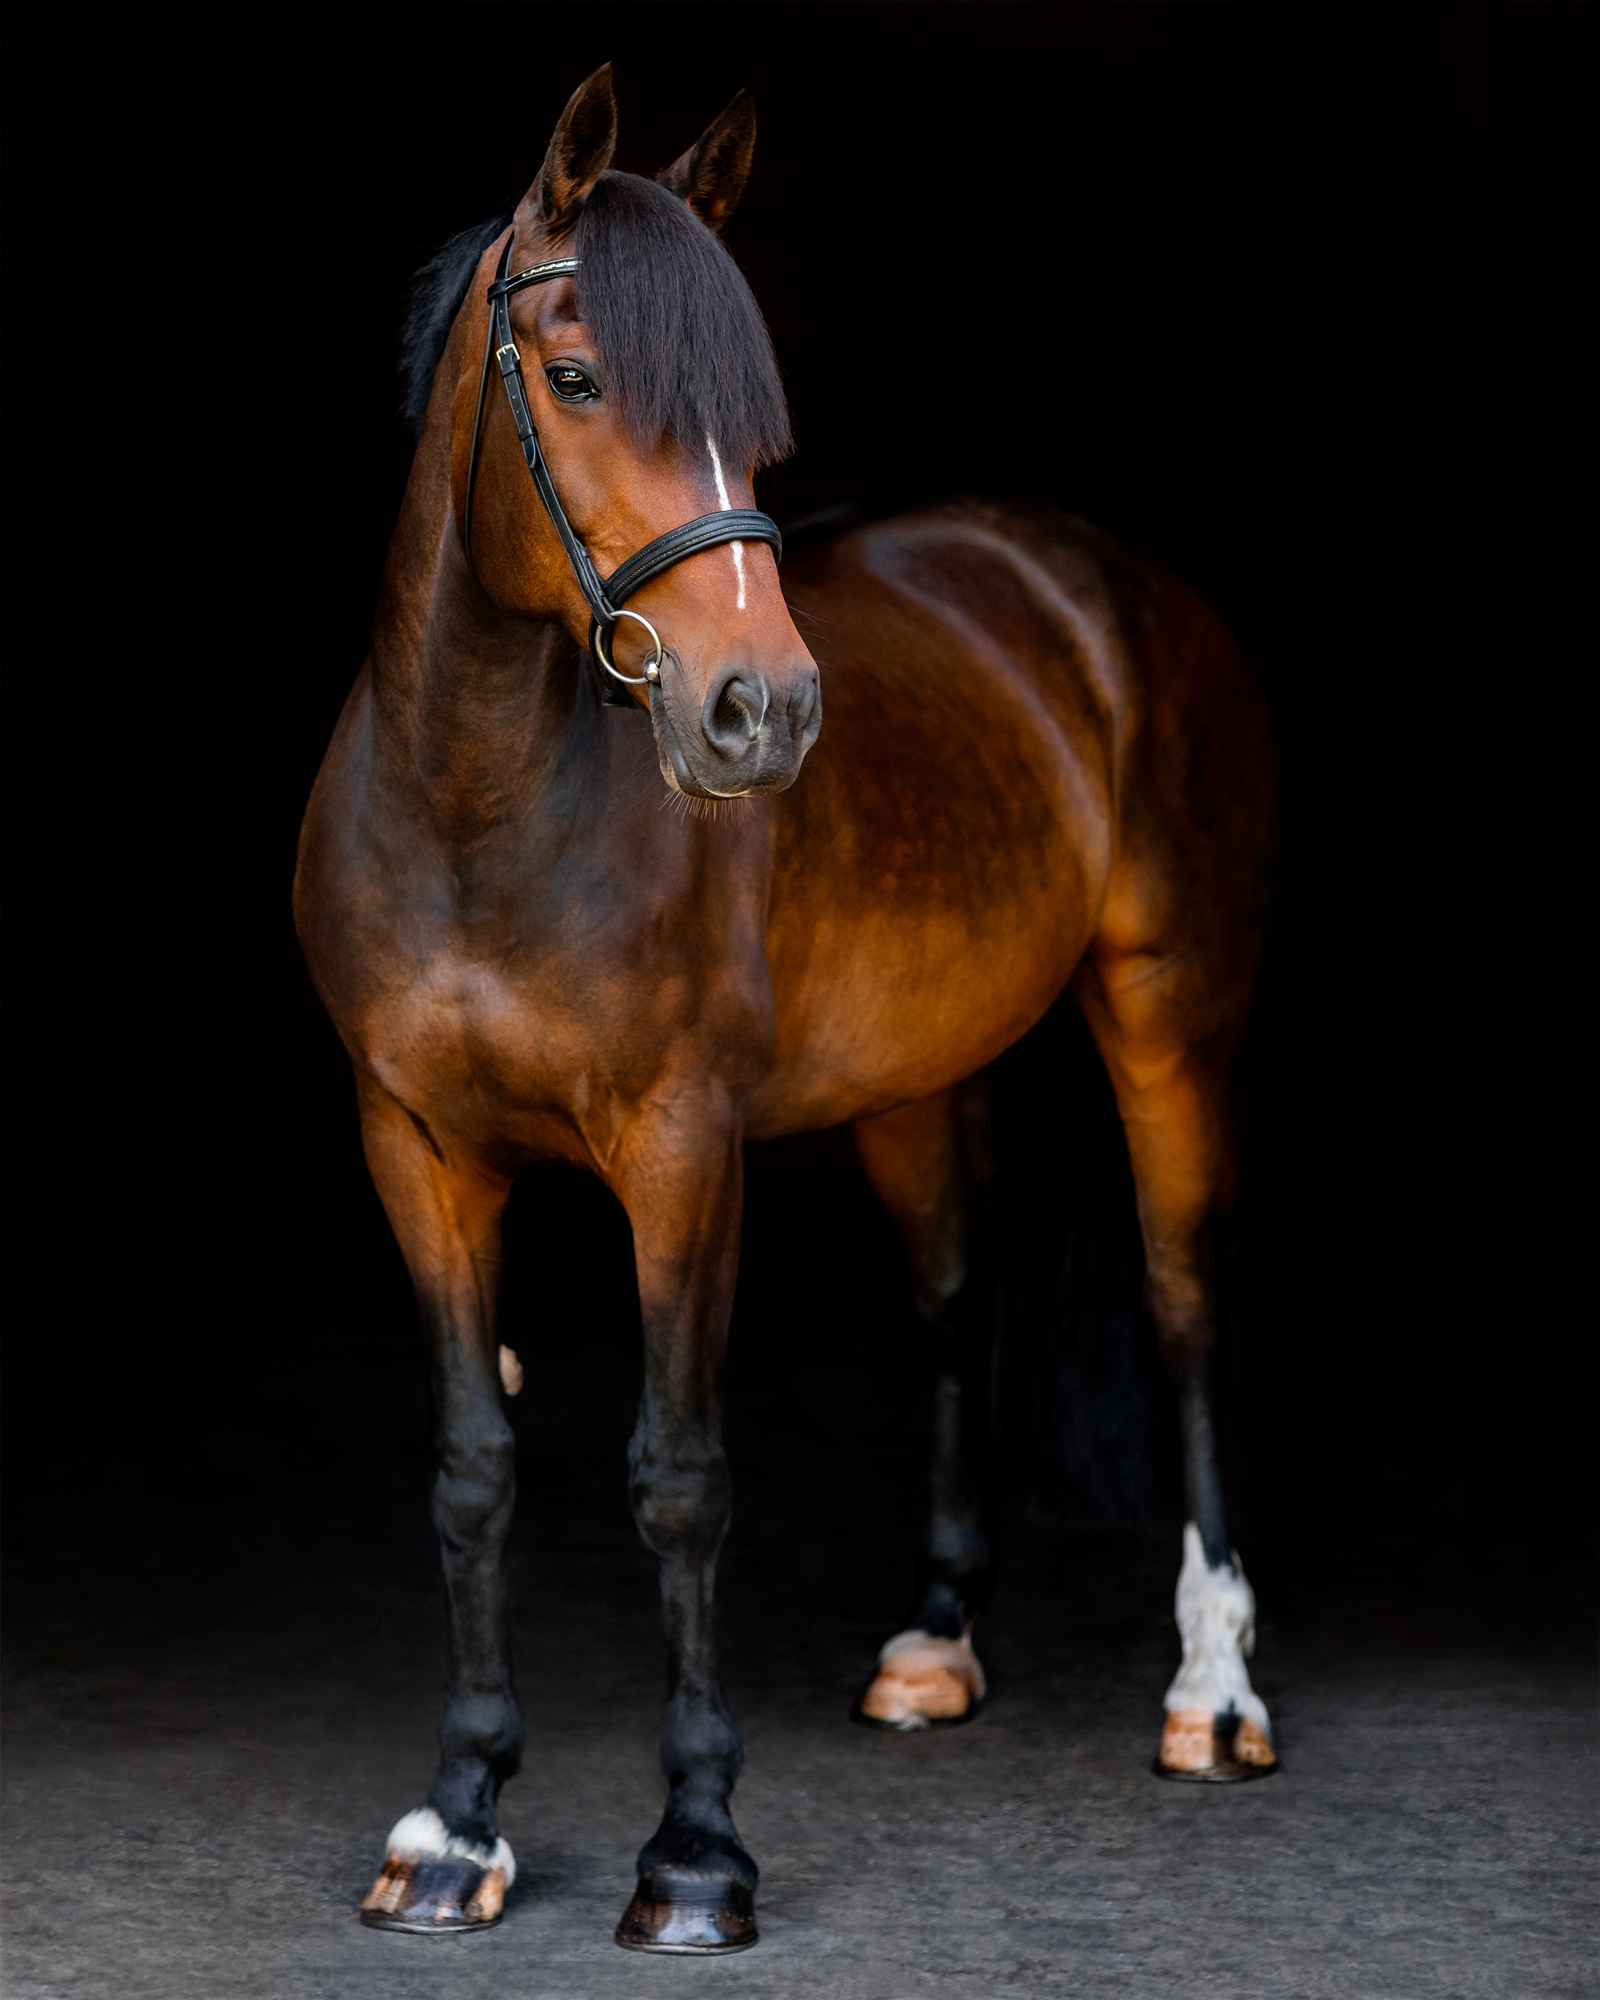 Black background equine portrait of a thoroughbred cross horse.